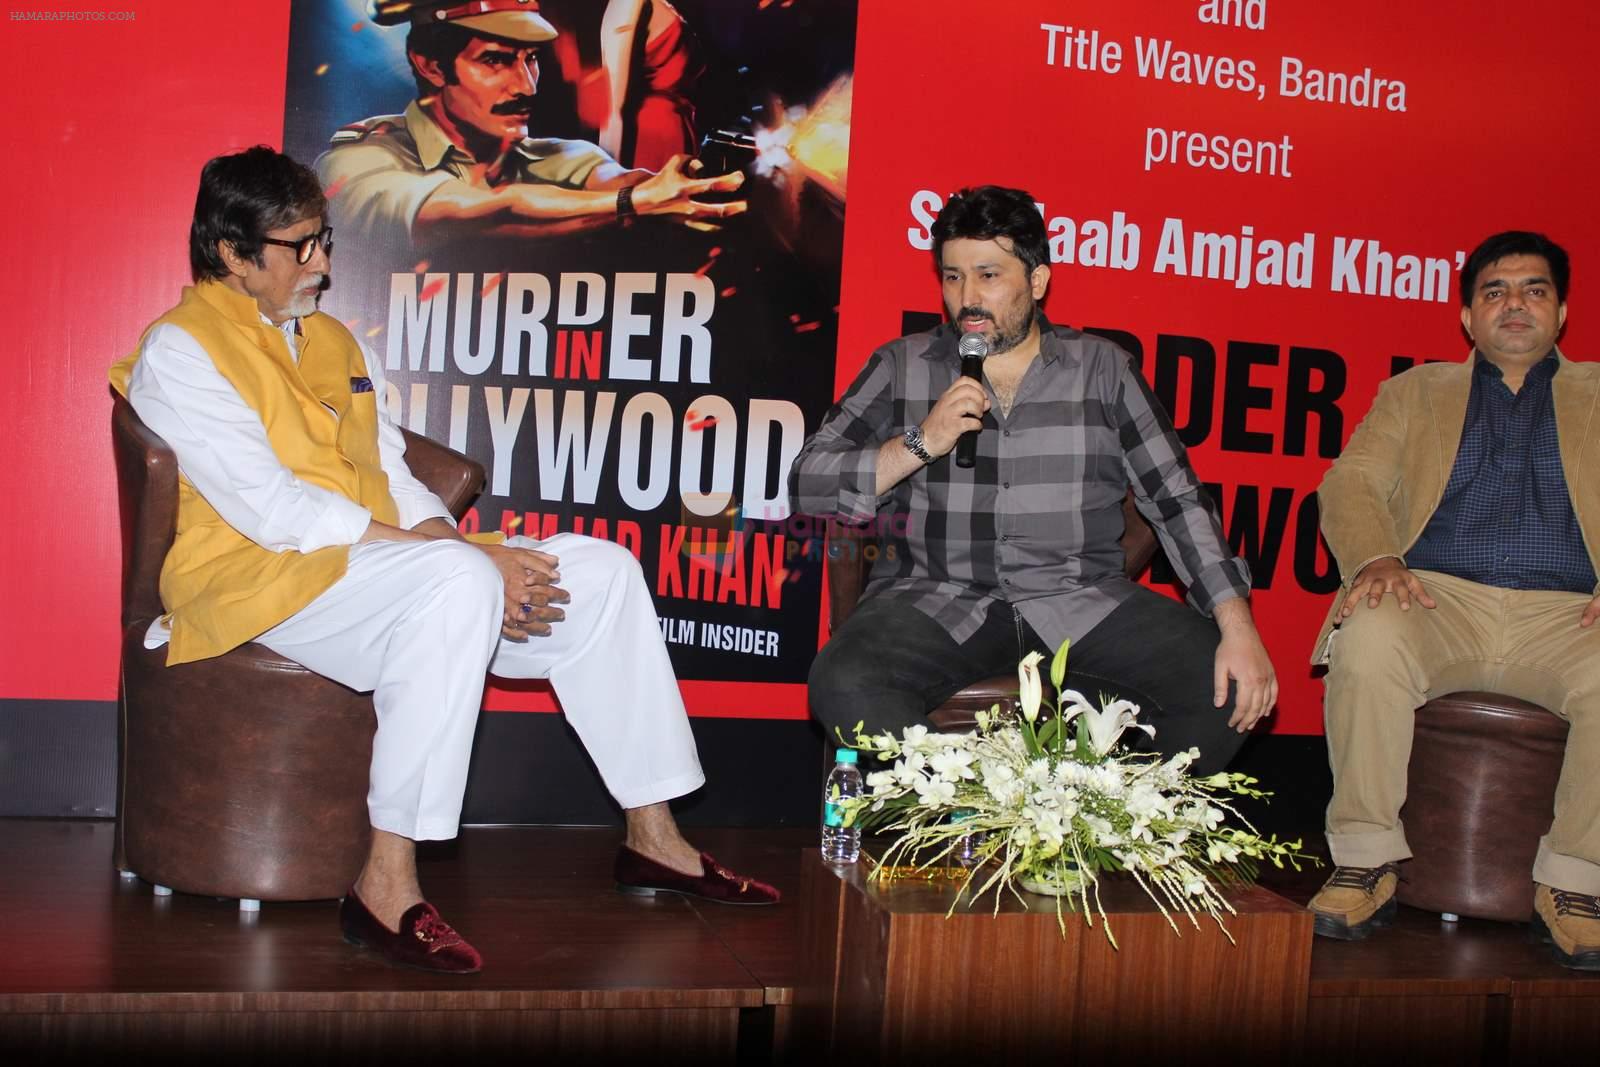 Amitabh Bachchan at Shadab Mehboob Khan's Murder in Bollywood book launch in Title Wave, Bandra on 14th July 2015